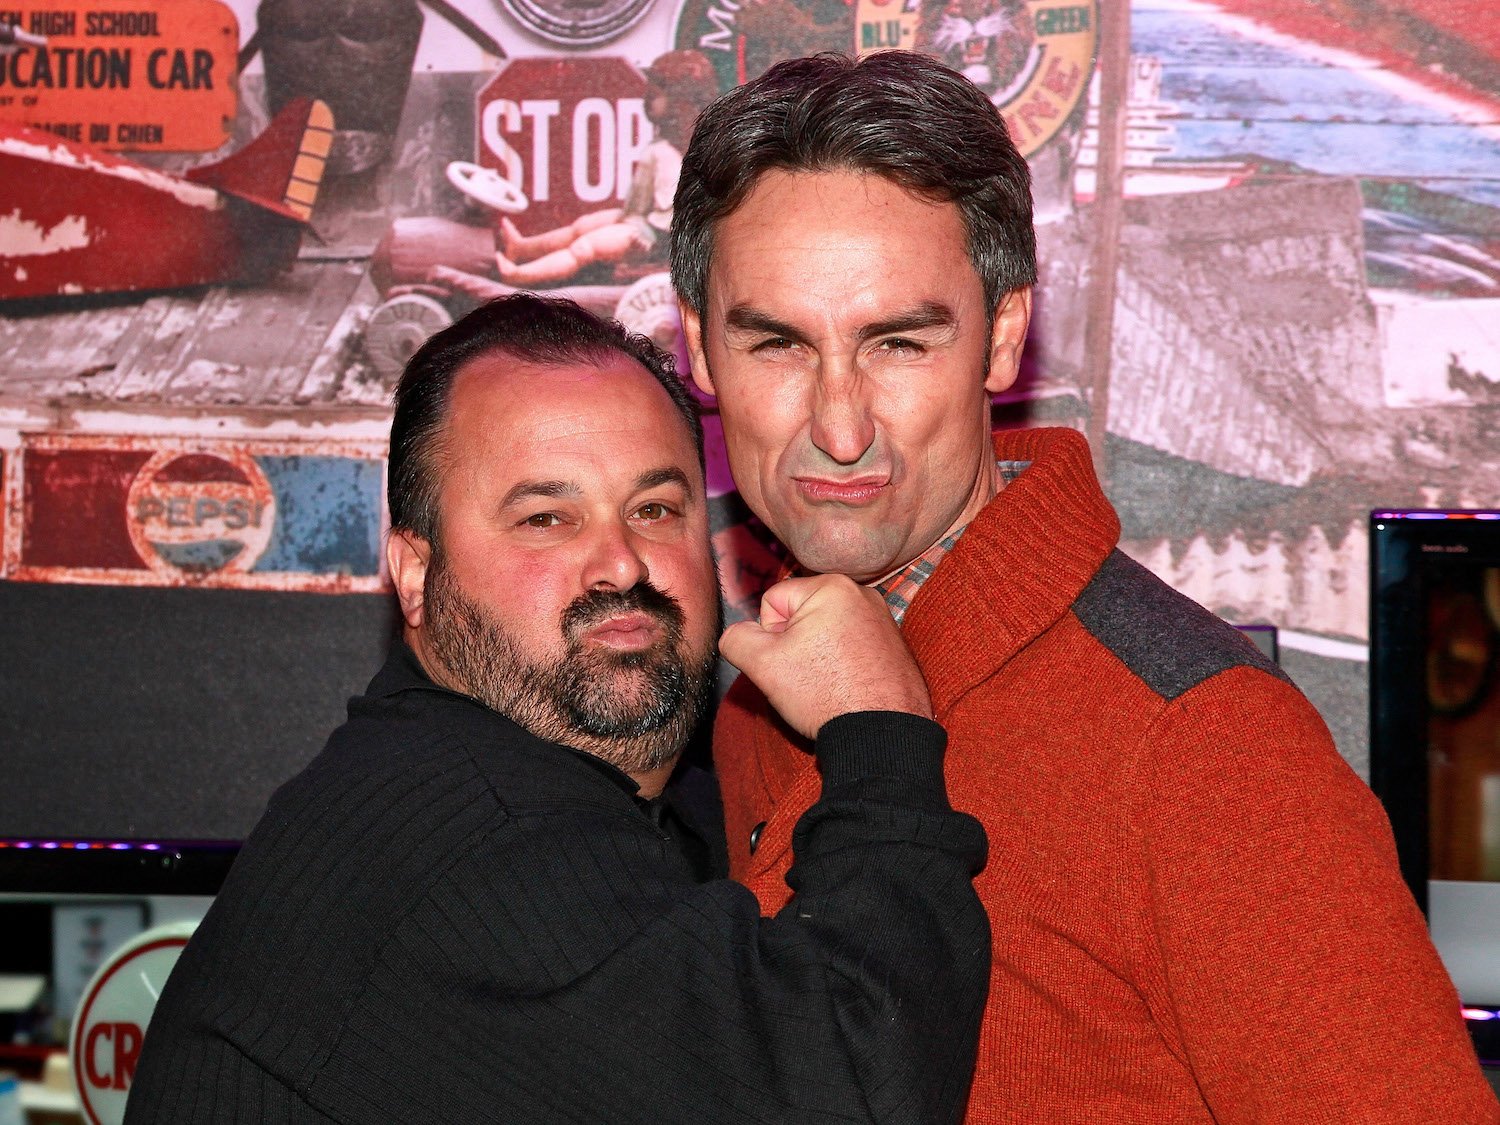 Frank Fritz and Mike Wolfe from 'American Pickers' standing together and making faces at the camera